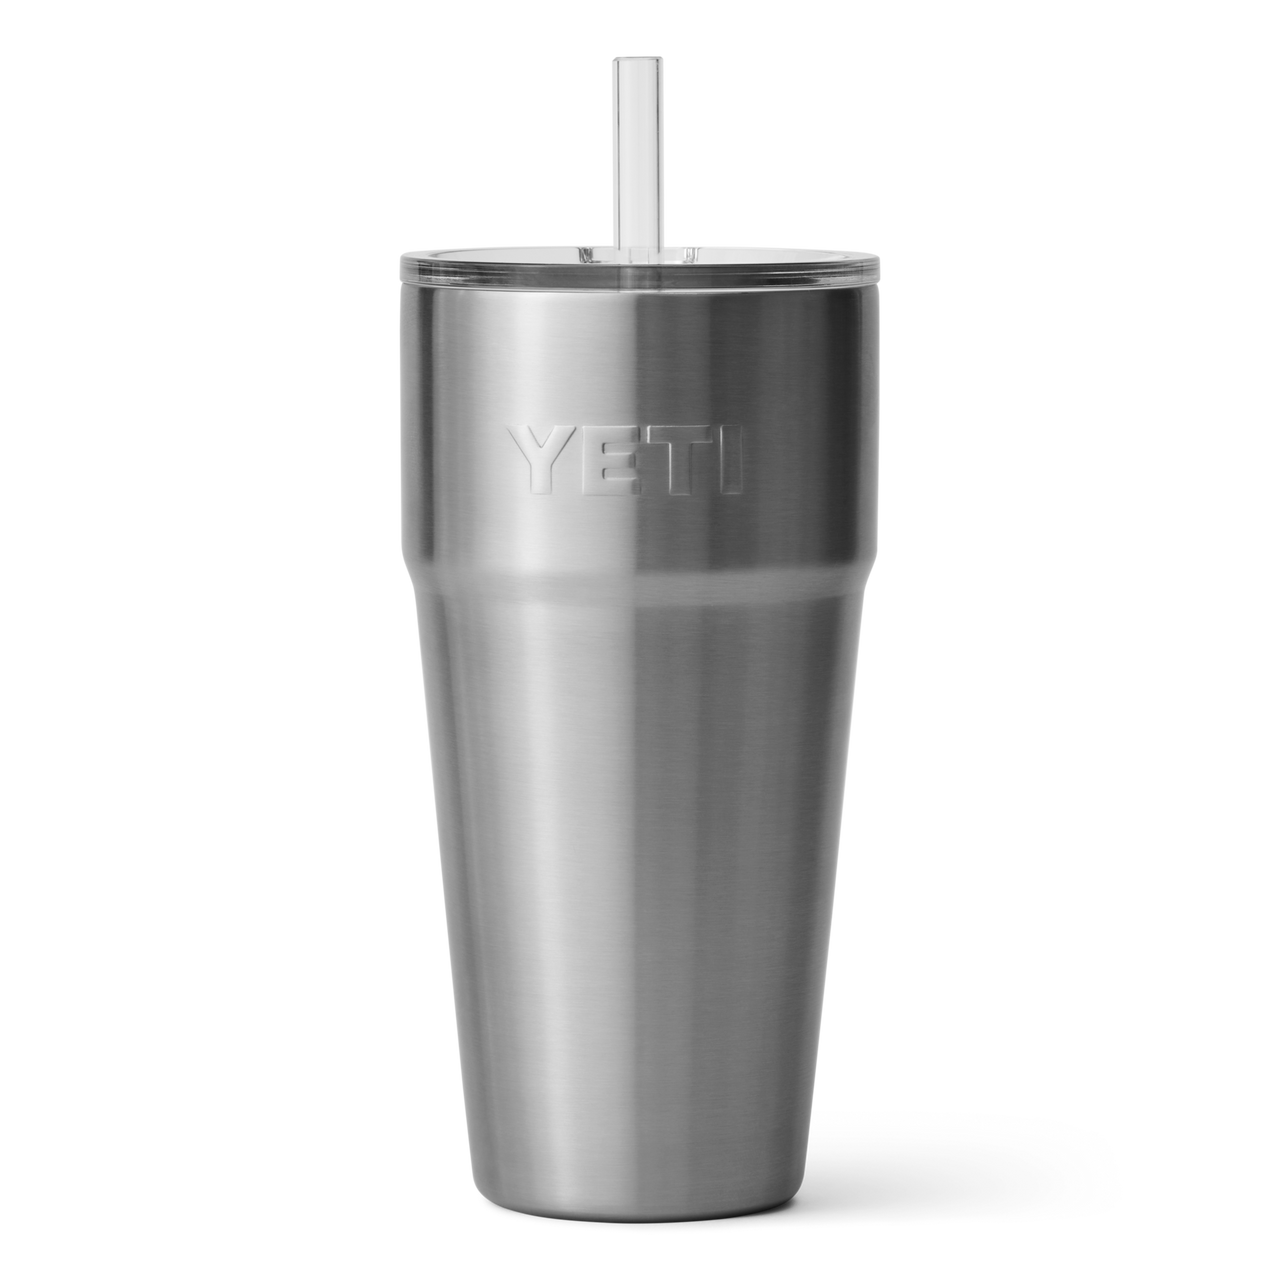 https://cdn11.bigcommerce.com/s-kk2jd0cxqh/images/stencil/1280x1280/products/15873/20762/yeti-rambler-26-oz-straw-cup-stainless-steel__18558.1688110142.png?c=1